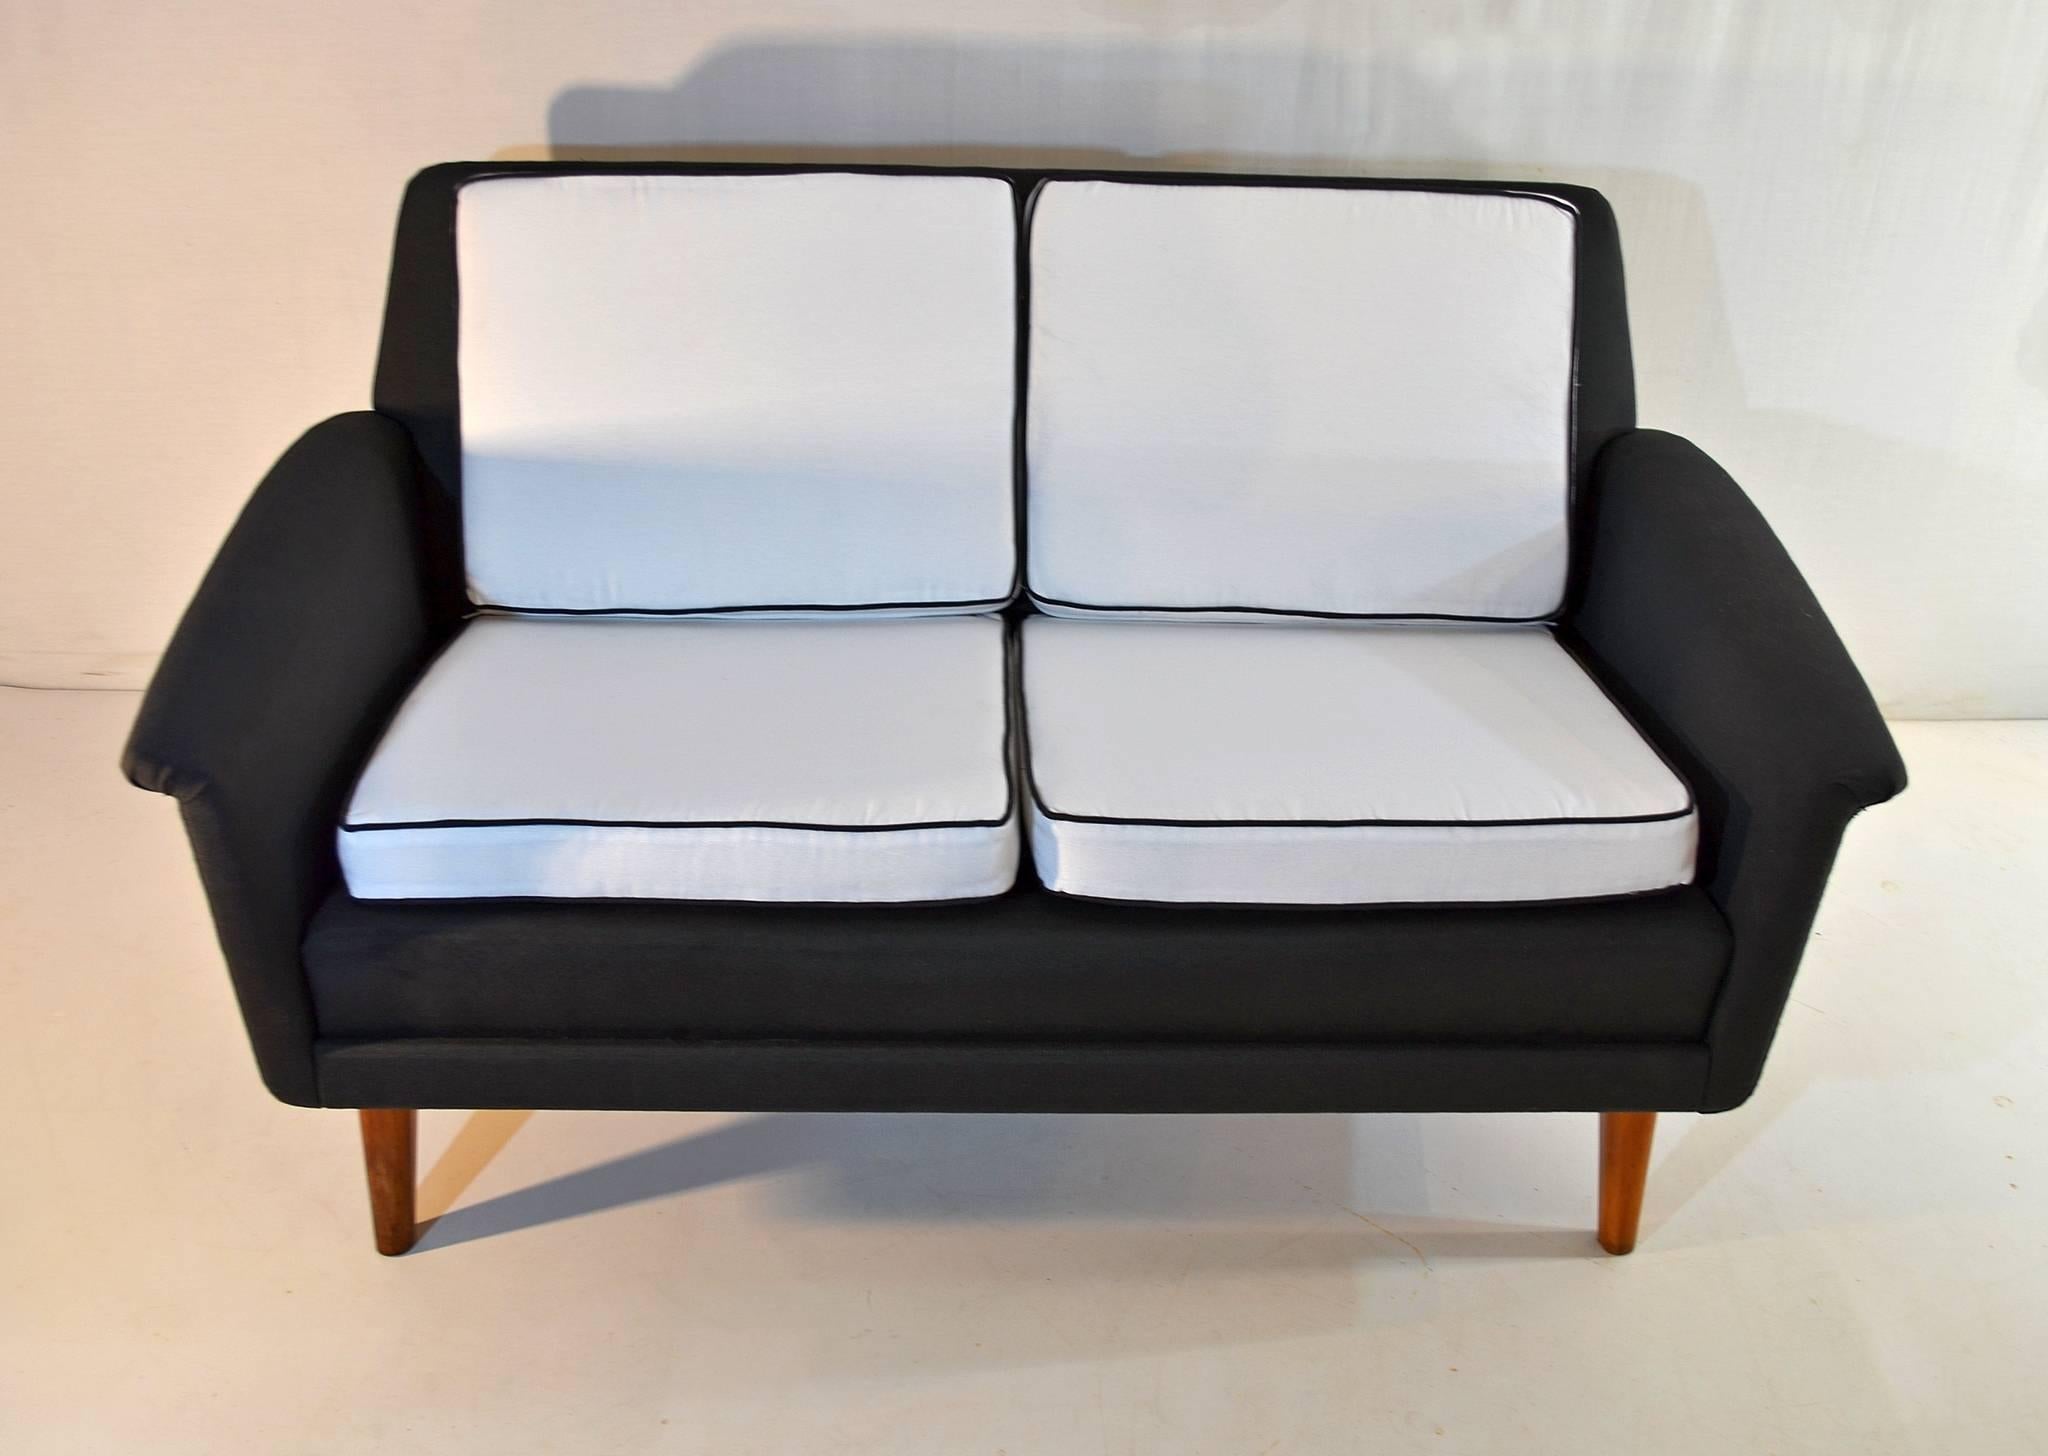 This sofa was produced by Ljungs Industries for DUX and designed by renowned designer Folke Ohlsson. The sofa has recently been professionally reupholstered in a black and white fabric. In very good condition. Measure: Seat height ca 45cm.